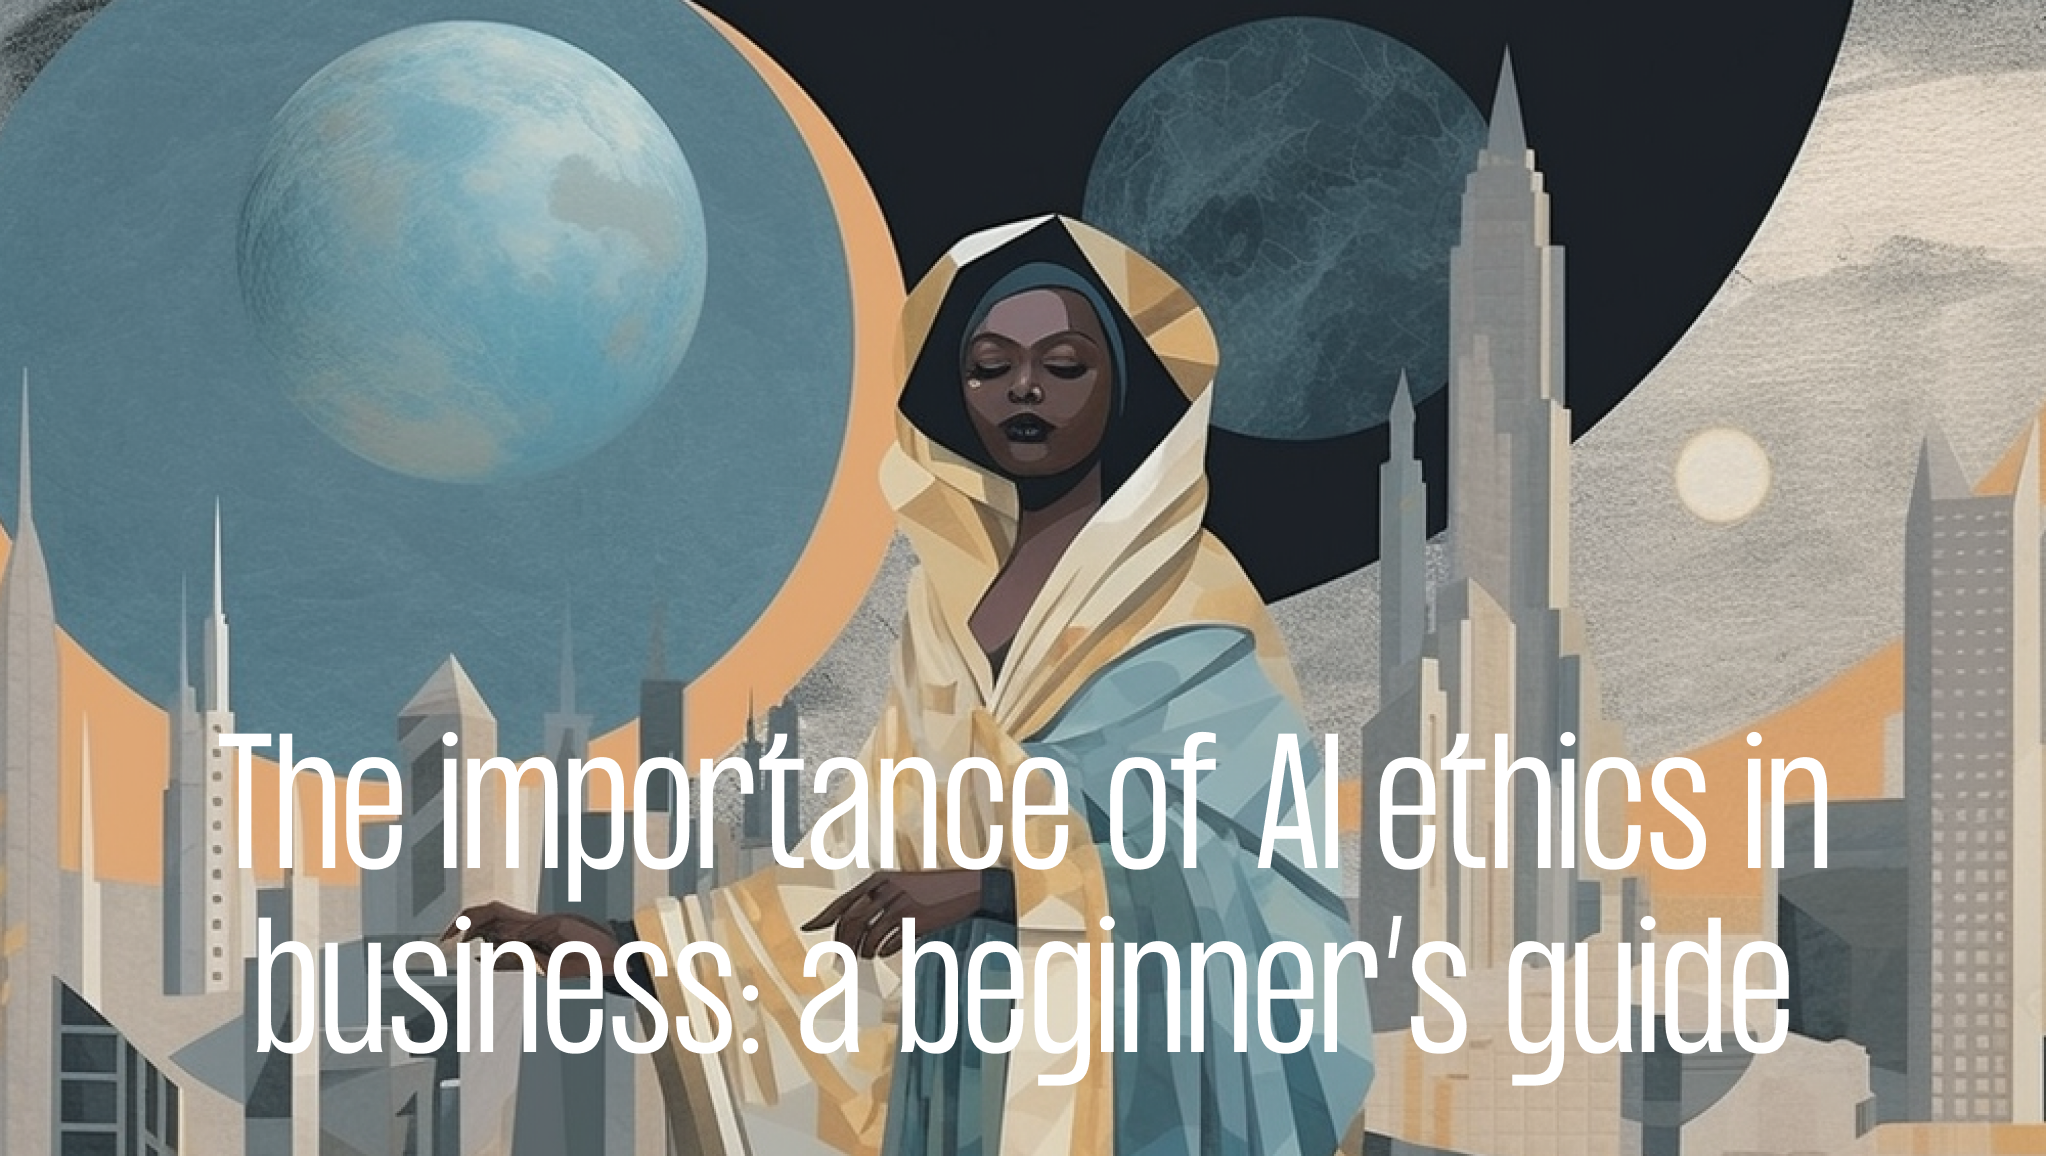 The importance of AI ethics in business: a beginner’s guide